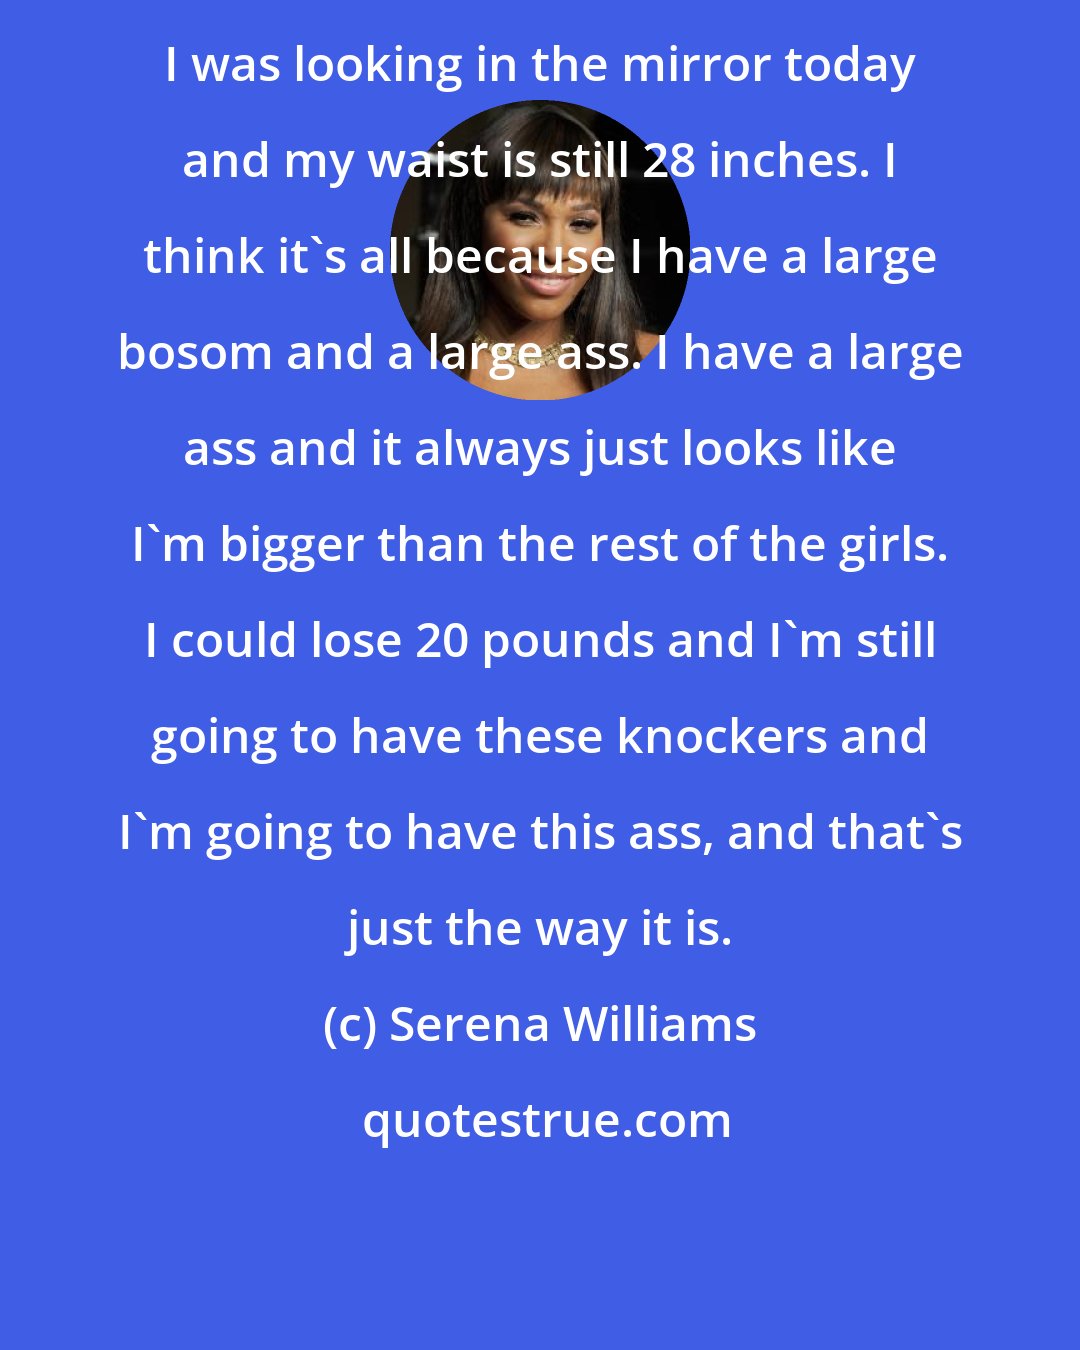 Serena Williams: I was looking in the mirror today and my waist is still 28 inches. I think it's all because I have a large bosom and a large ass. I have a large ass and it always just looks like I'm bigger than the rest of the girls. I could lose 20 pounds and I'm still going to have these knockers and I'm going to have this ass, and that's just the way it is.